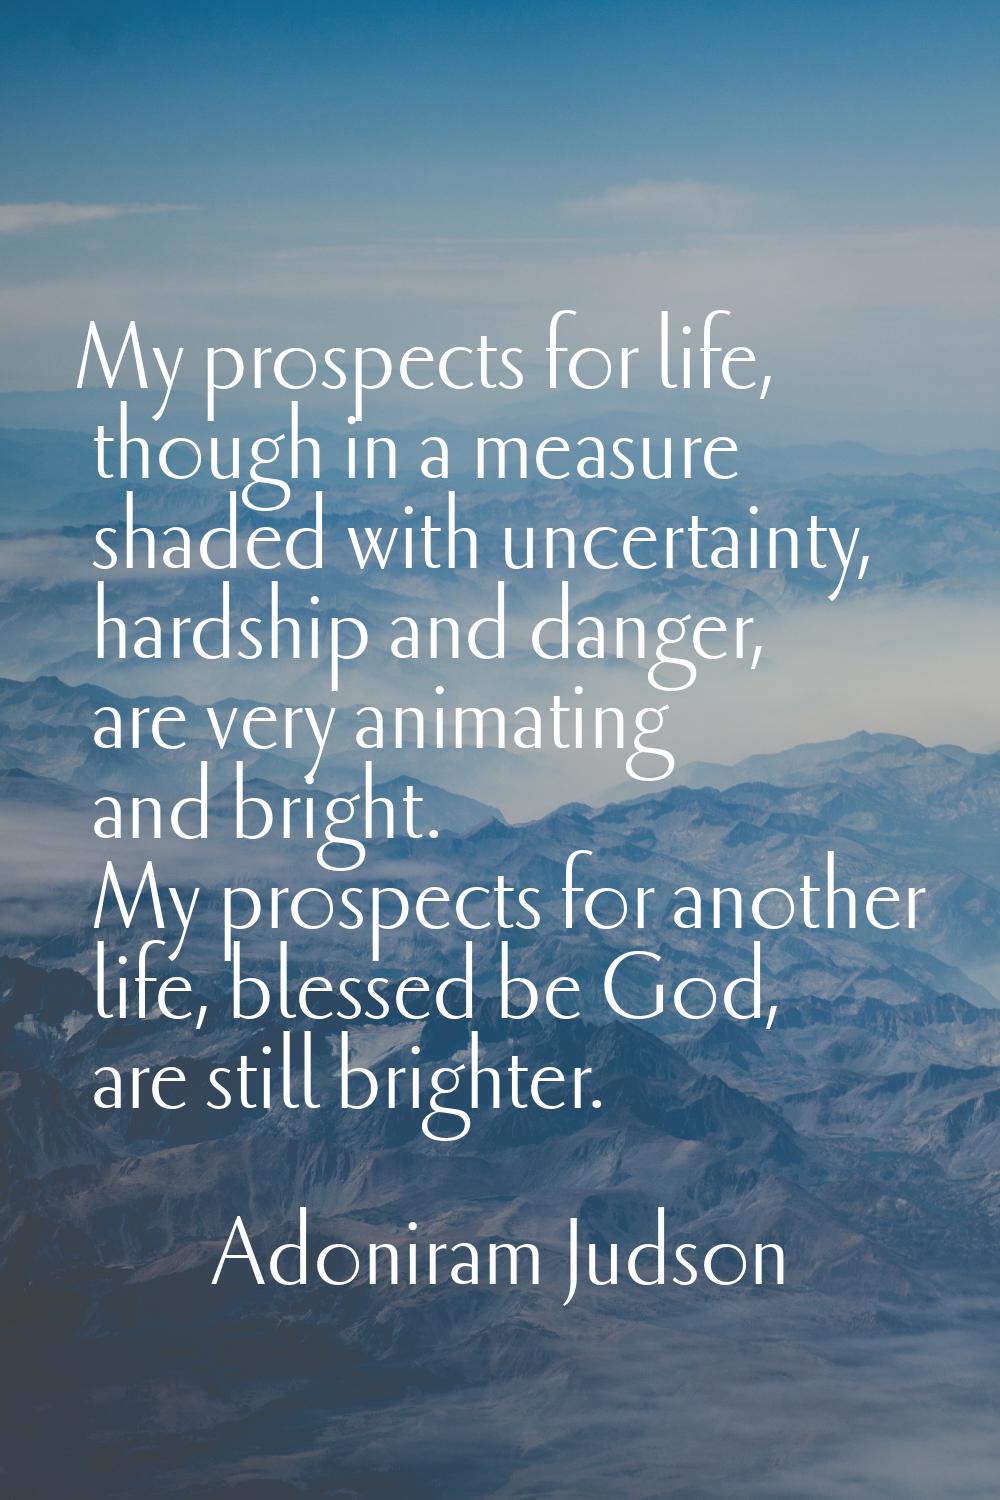 My prospects for life, though in a measure shaded with uncertainty, hardship and danger, are very a